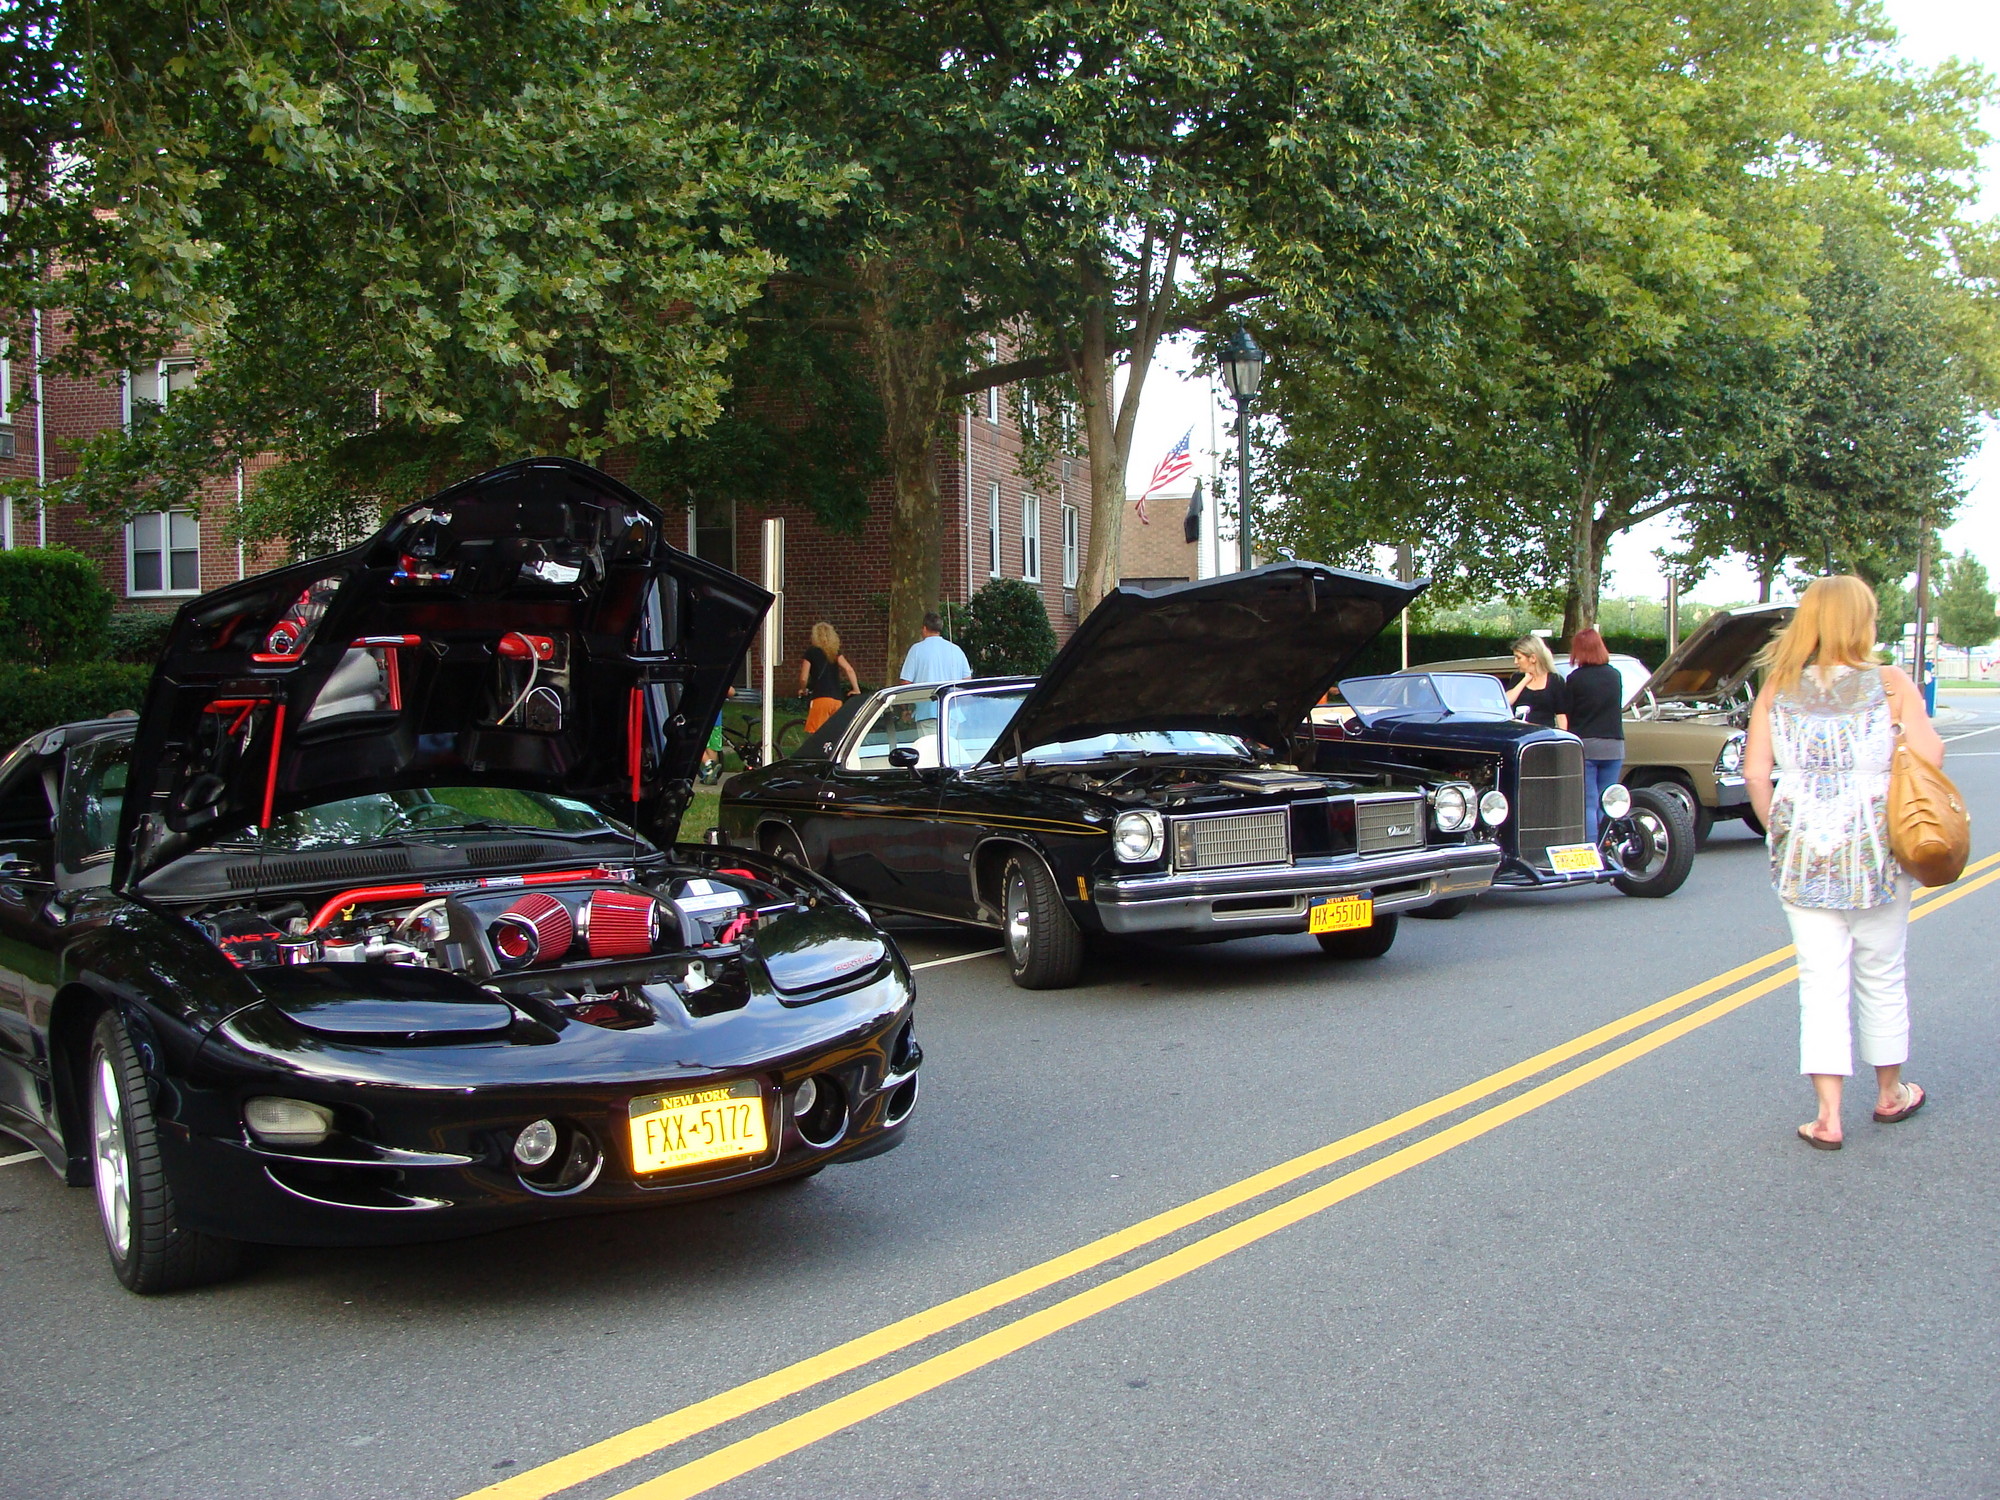 Last year’s car show drew residents from East Rockaway and neighboring towns to Main Street on summer Monday nights.